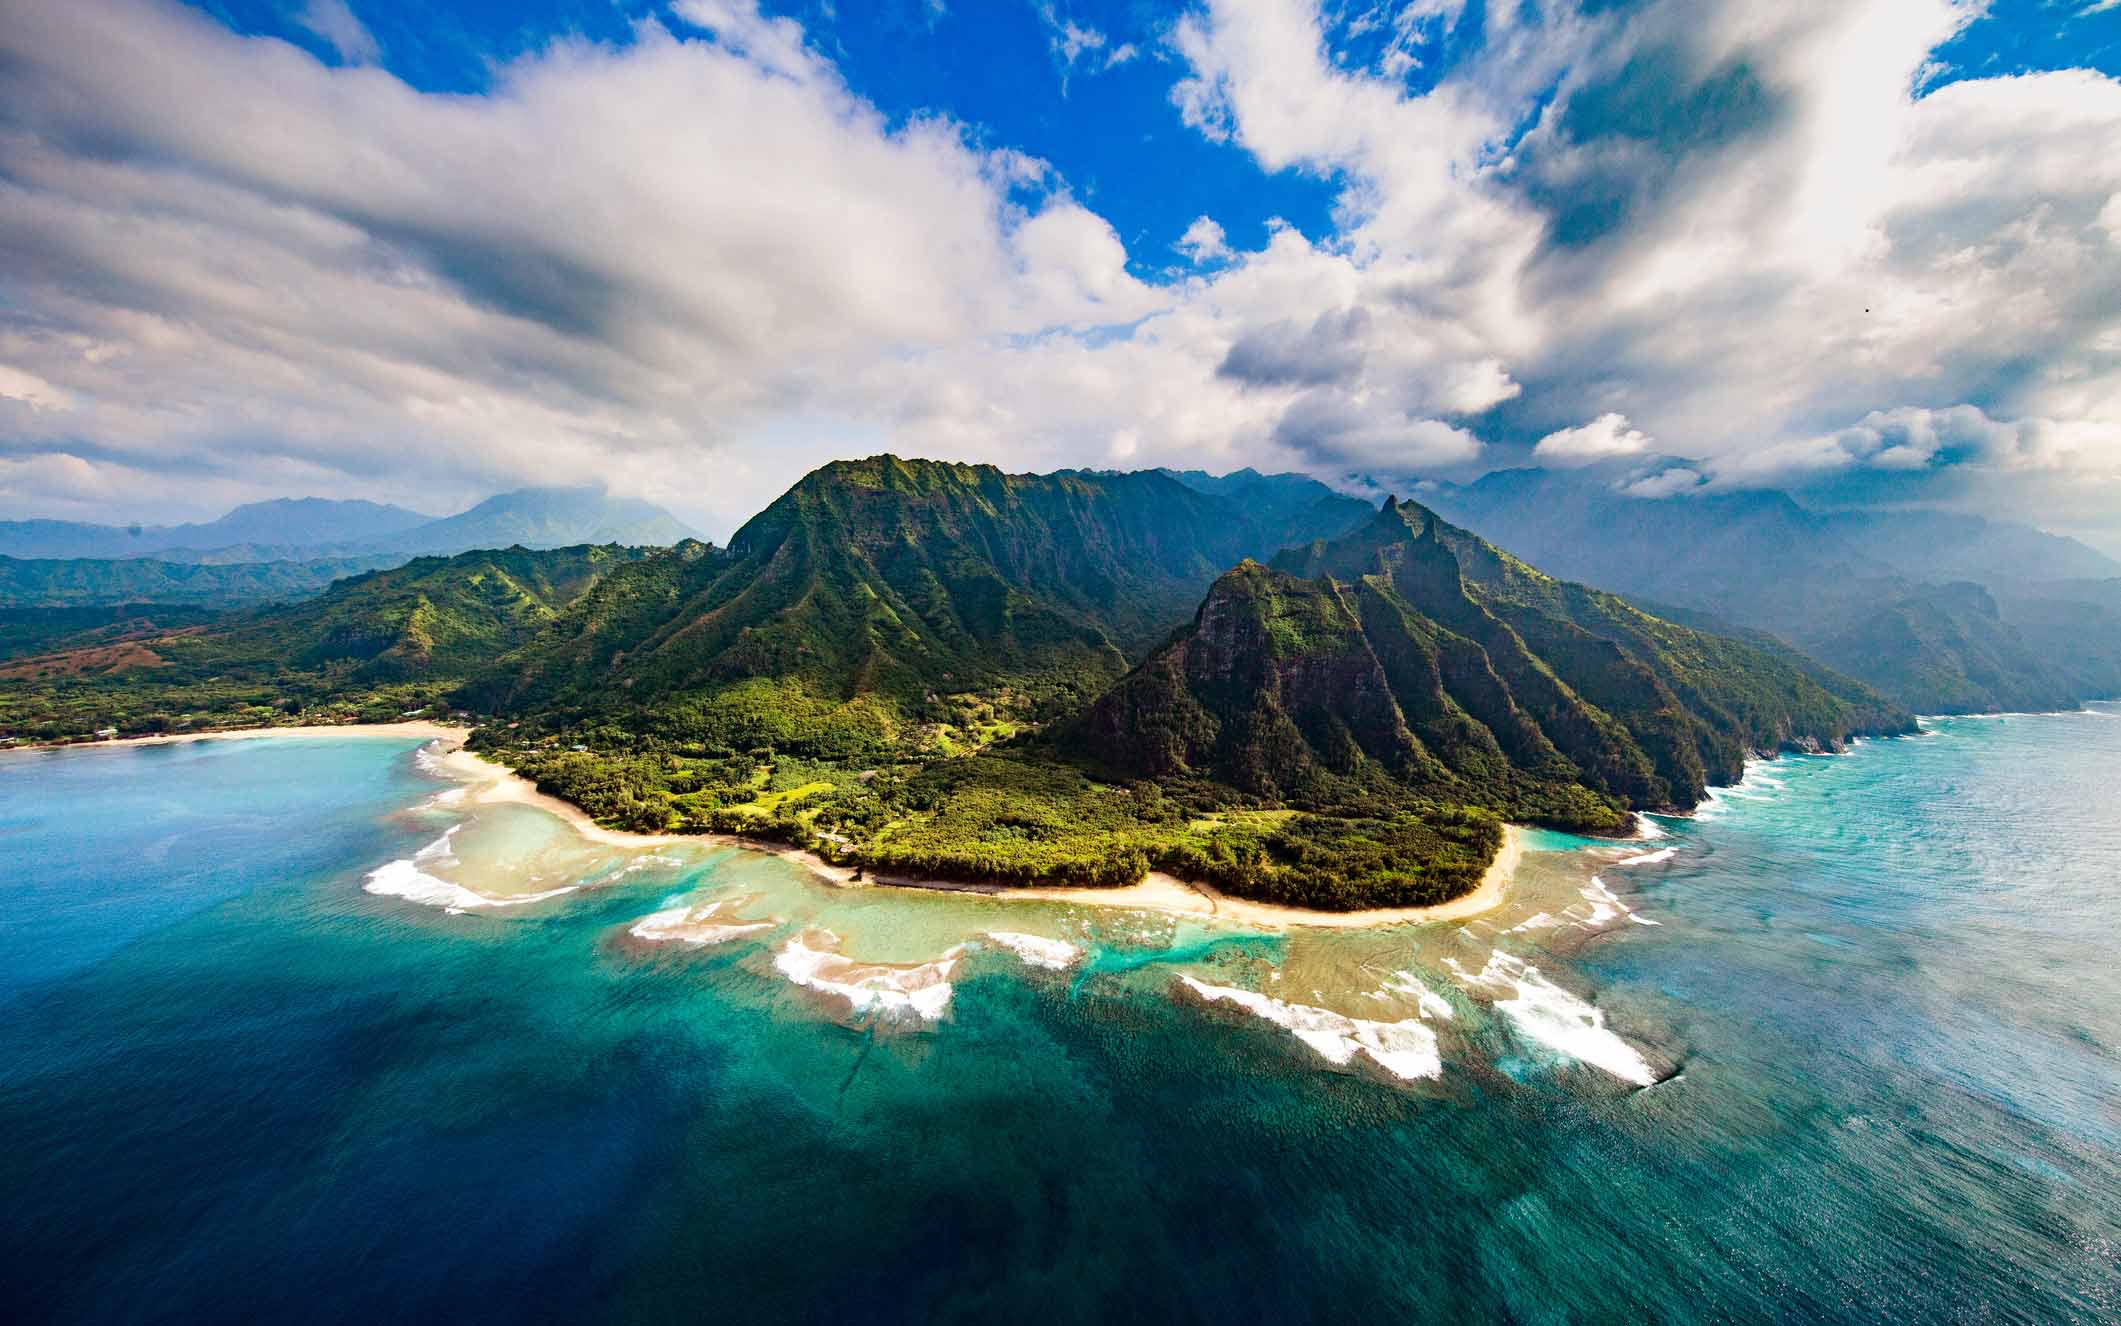 NYC tourist arrested in Hawaii for violating blockade; Instagram pics showed him on the beach